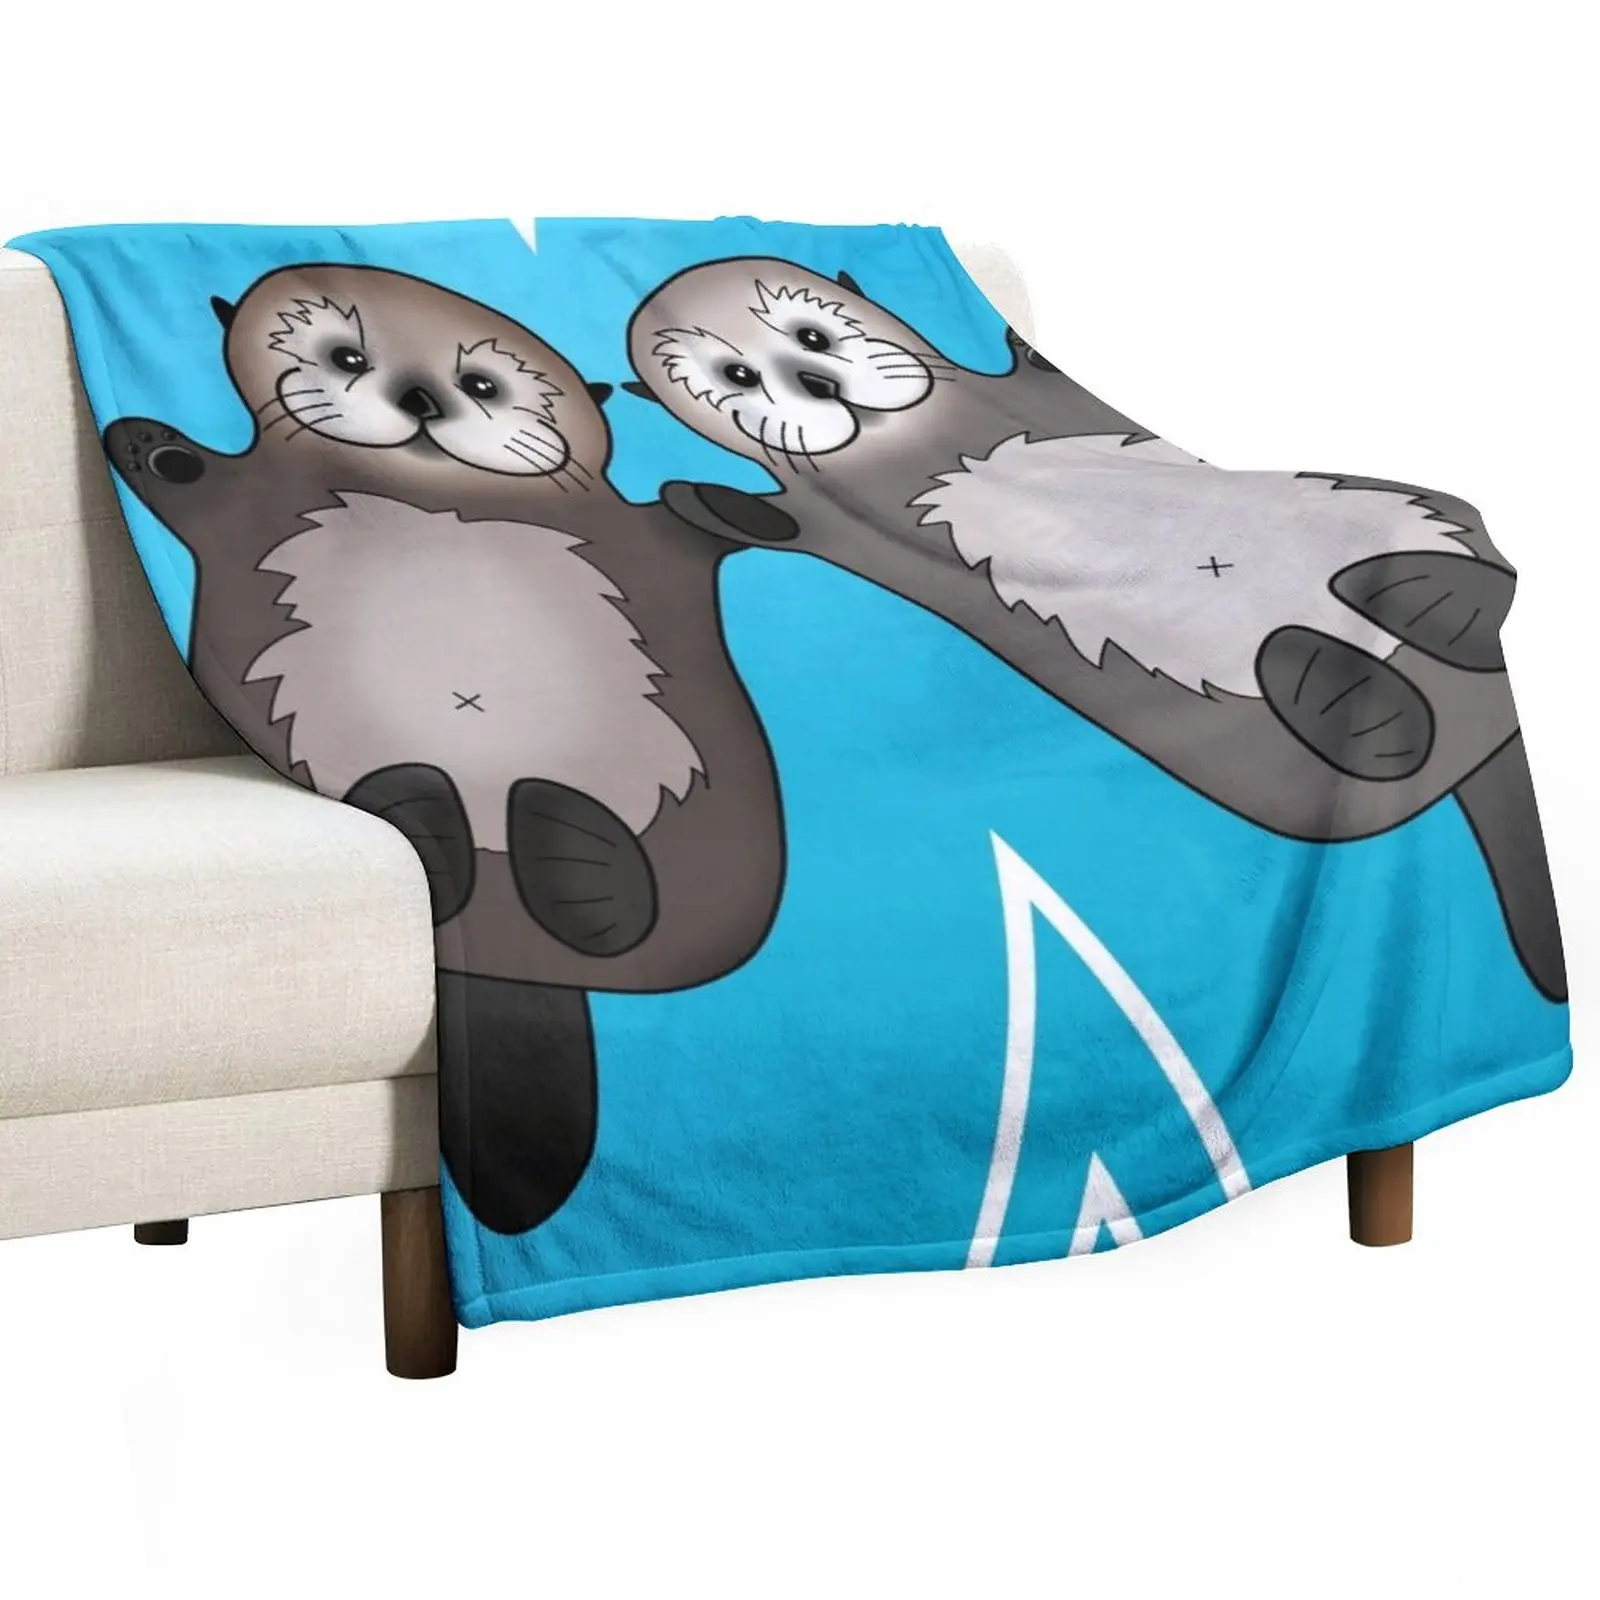 

Otters Holding Hands - Sea Otter Couple Throw Blanket cosplay anime Bed covers Baby Blanket For Sofa